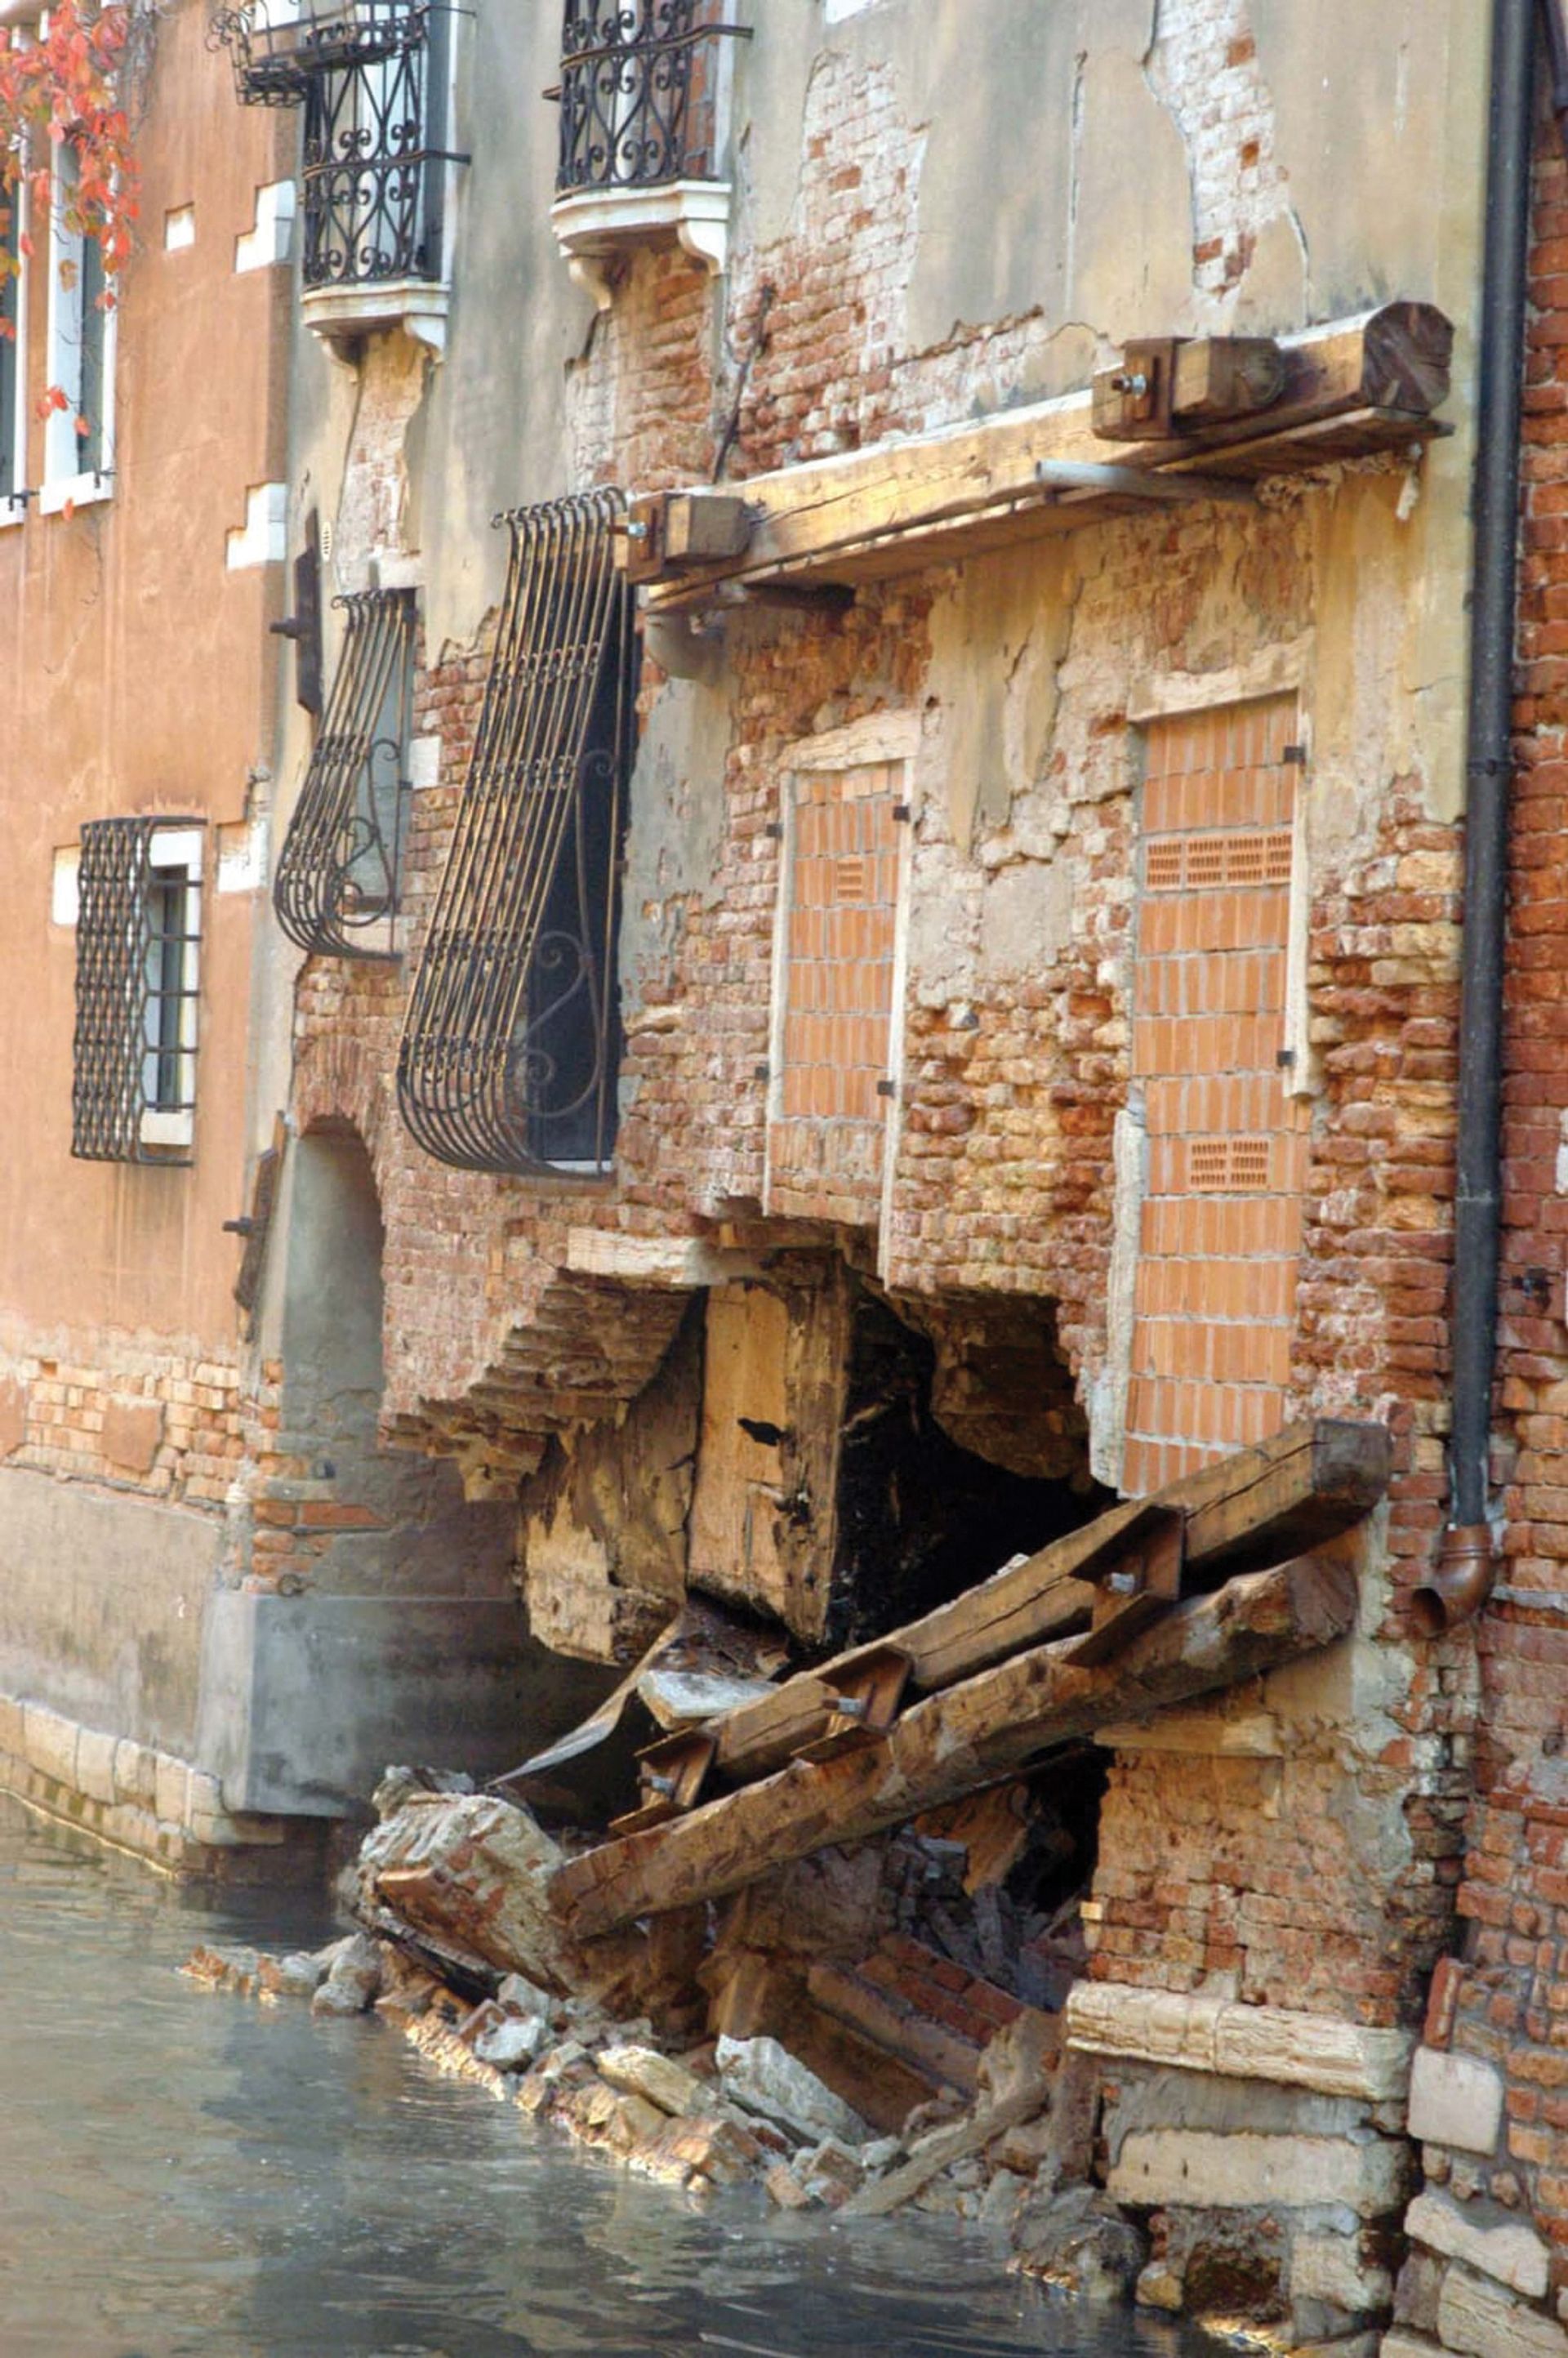 A collapsed brick wall of a house in Venice, a victim of rising damp and increased salinity in the water. Photo: © Marco Tagliapietra